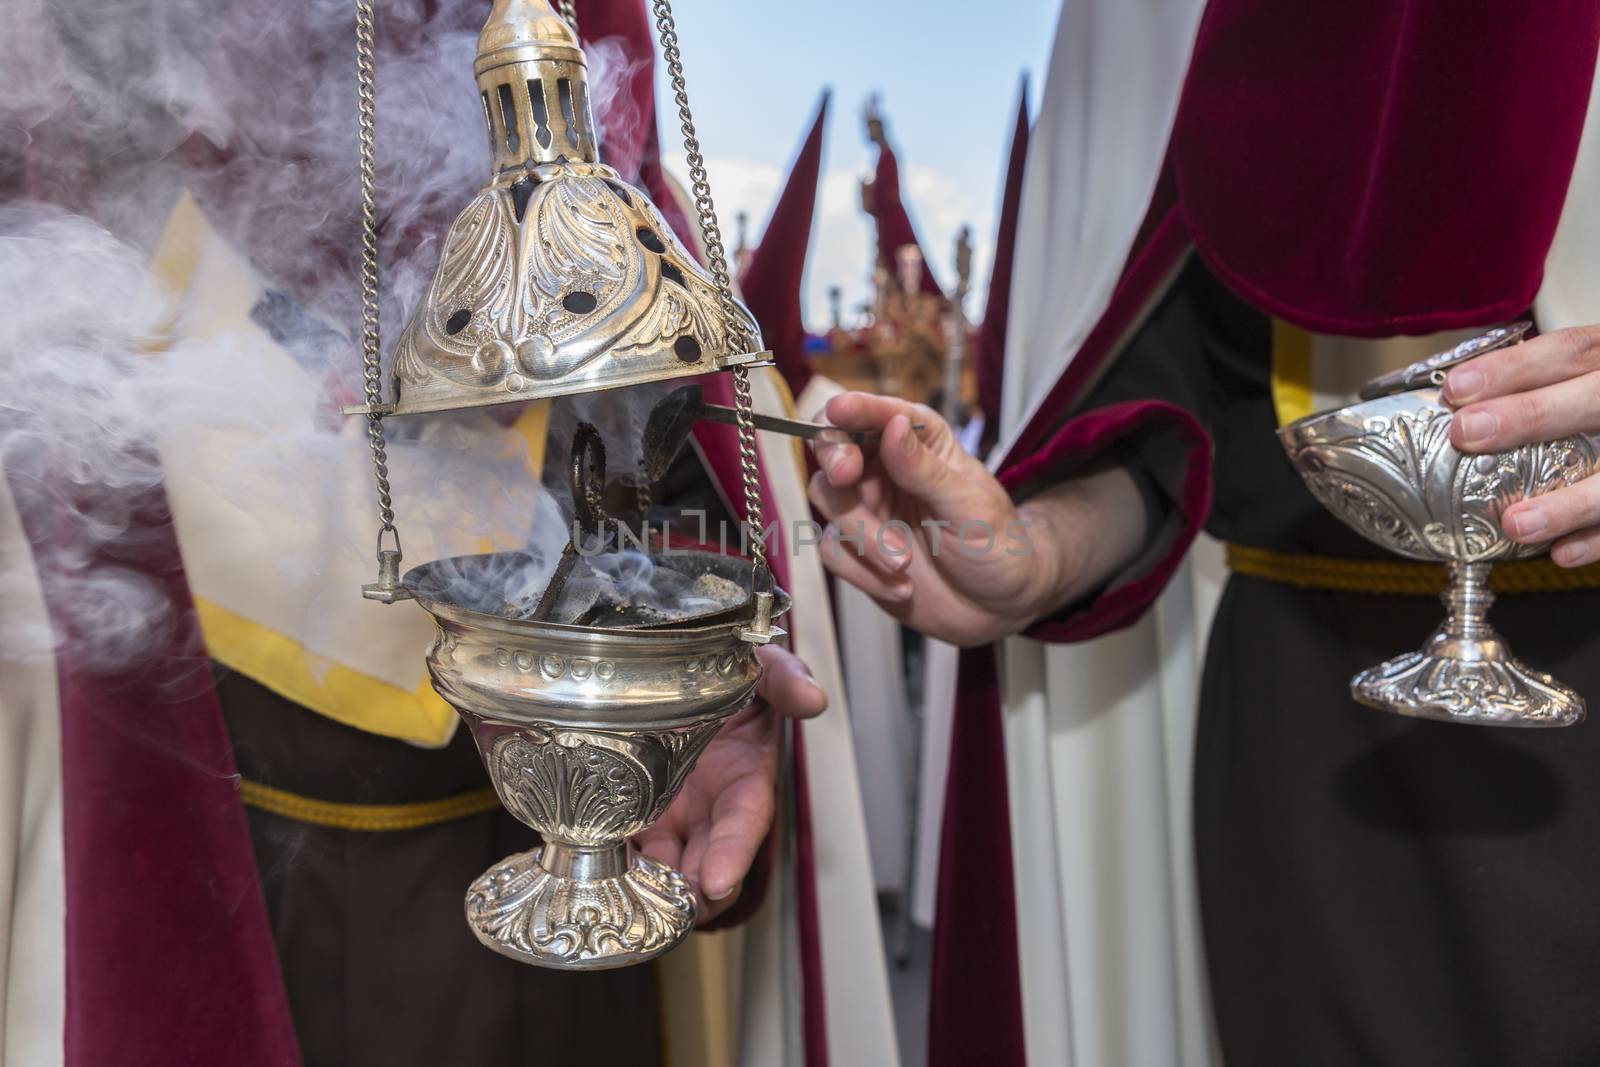 Censer of silver or alpaca to burn incense in the holy week, Spa by digicomphoto